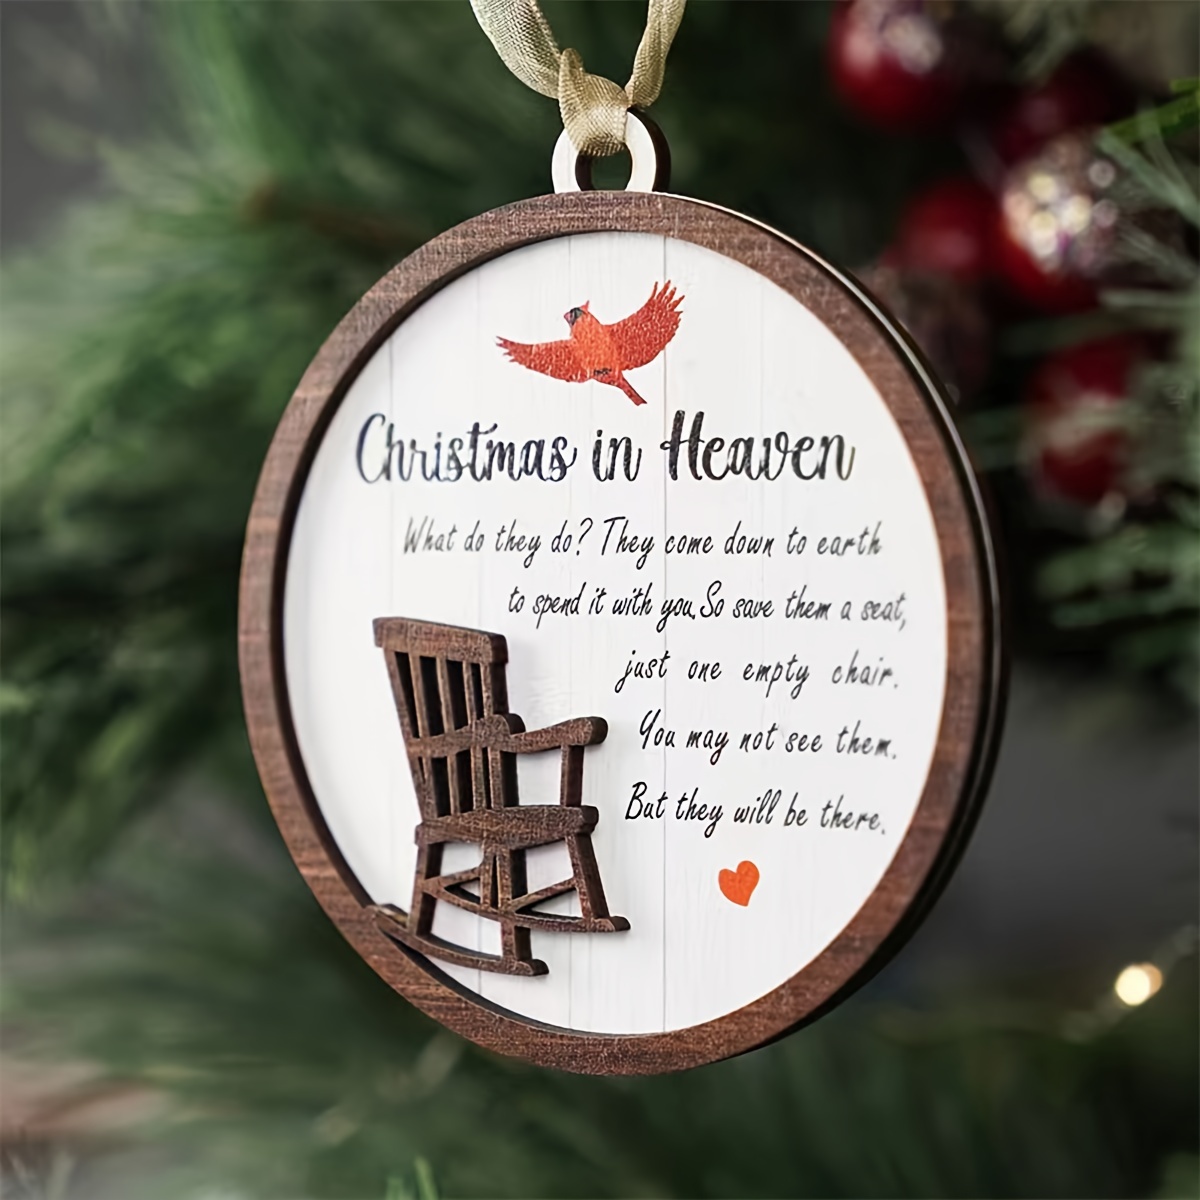 IAMAGOODLADY Christmas Decorations,Christmas in Memorial Ornament Mini  Wooden Rocking Chair with Meaningful Tag Sign Home Decor Desktop Christmas